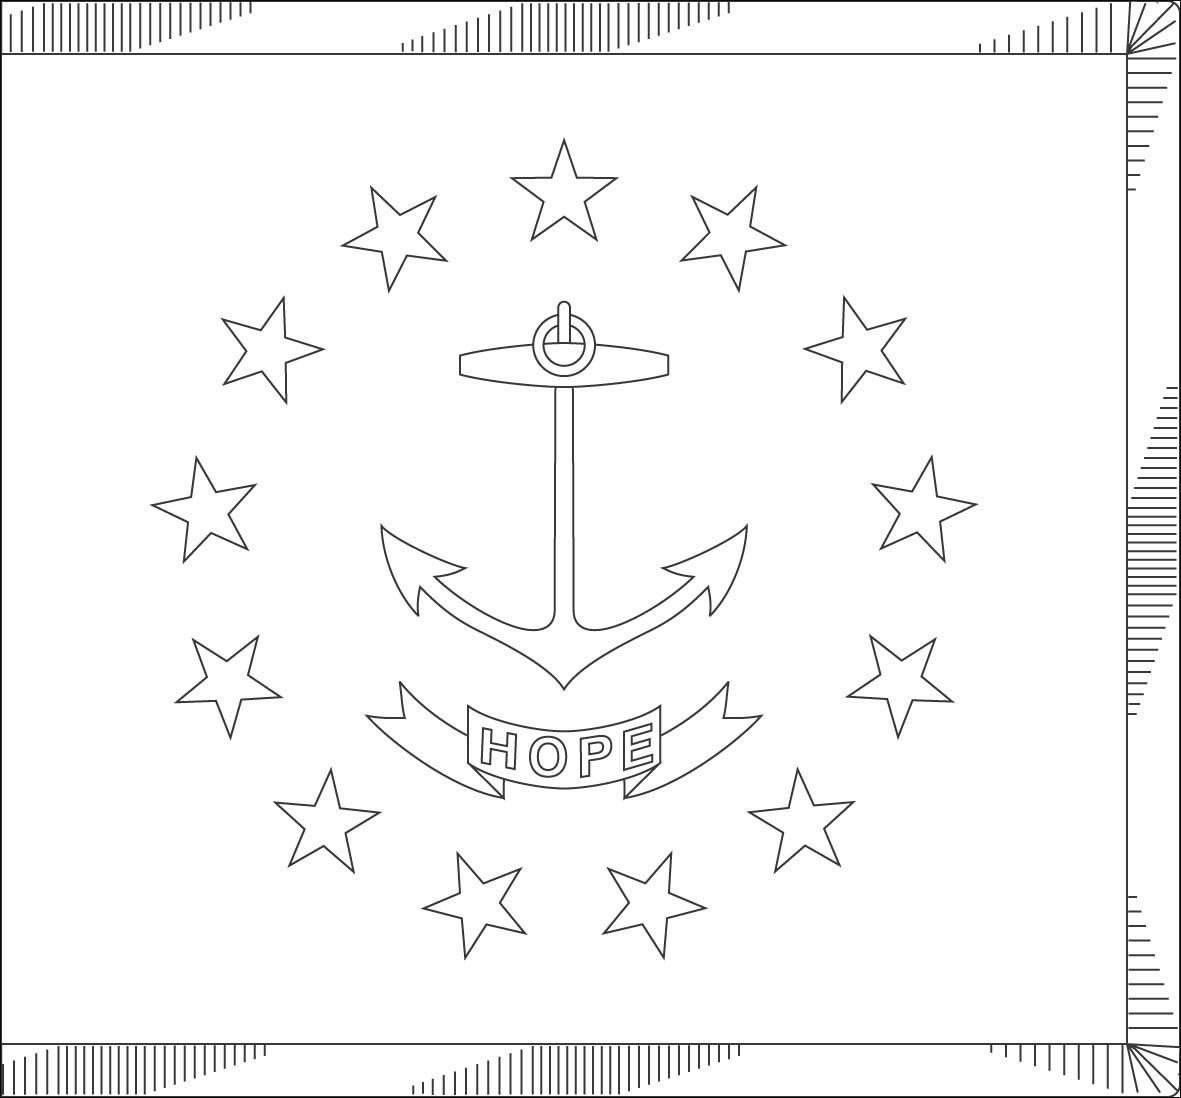 World Flags Coloring Sheets 6